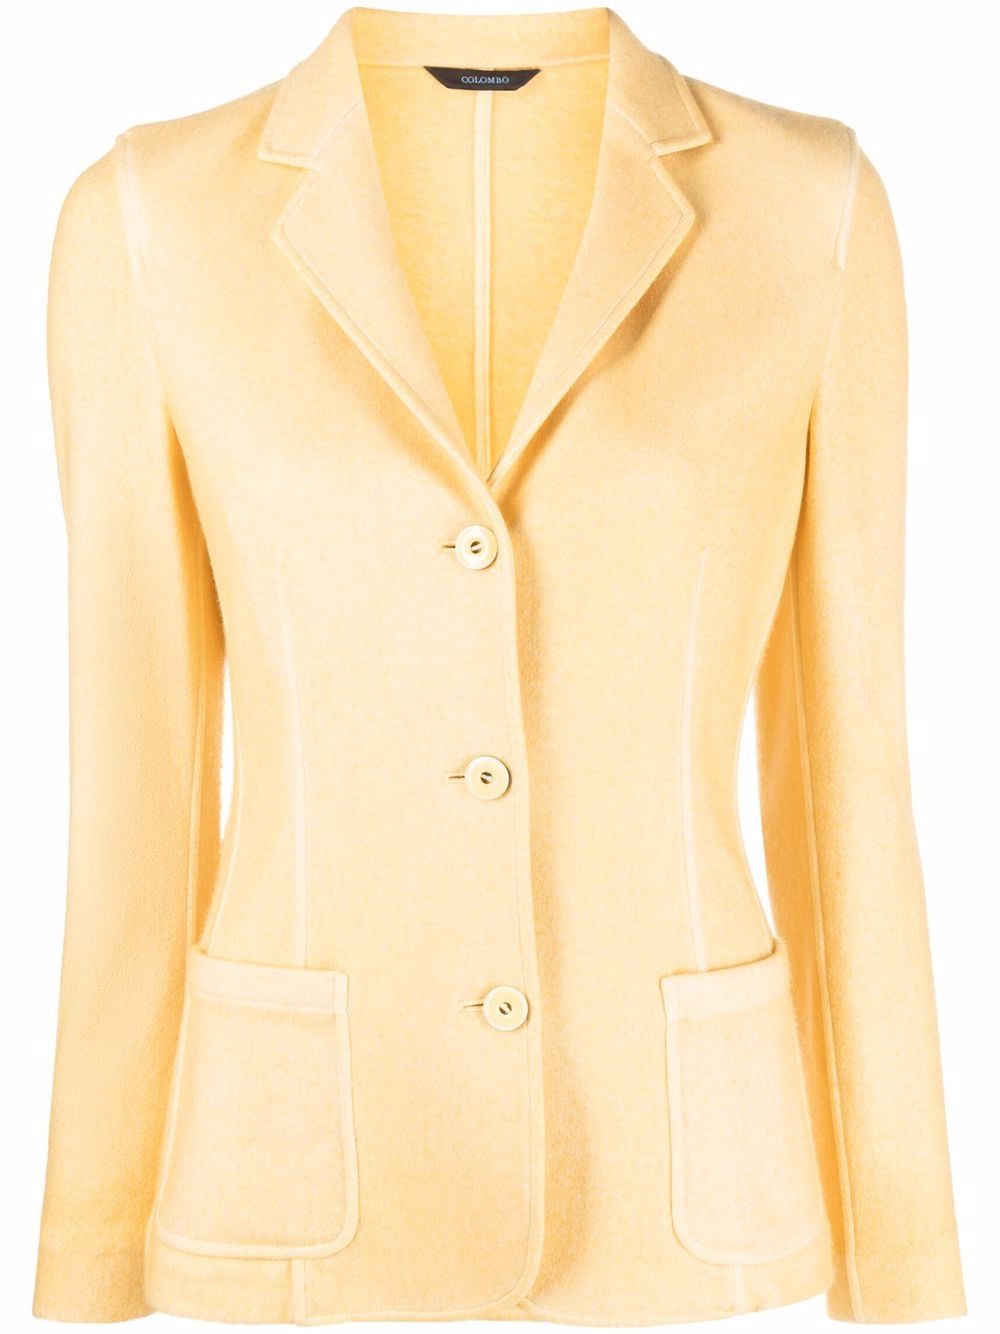 Colombo COLOMBO- Cashmere And Silk Blend Single Breasted Jacket